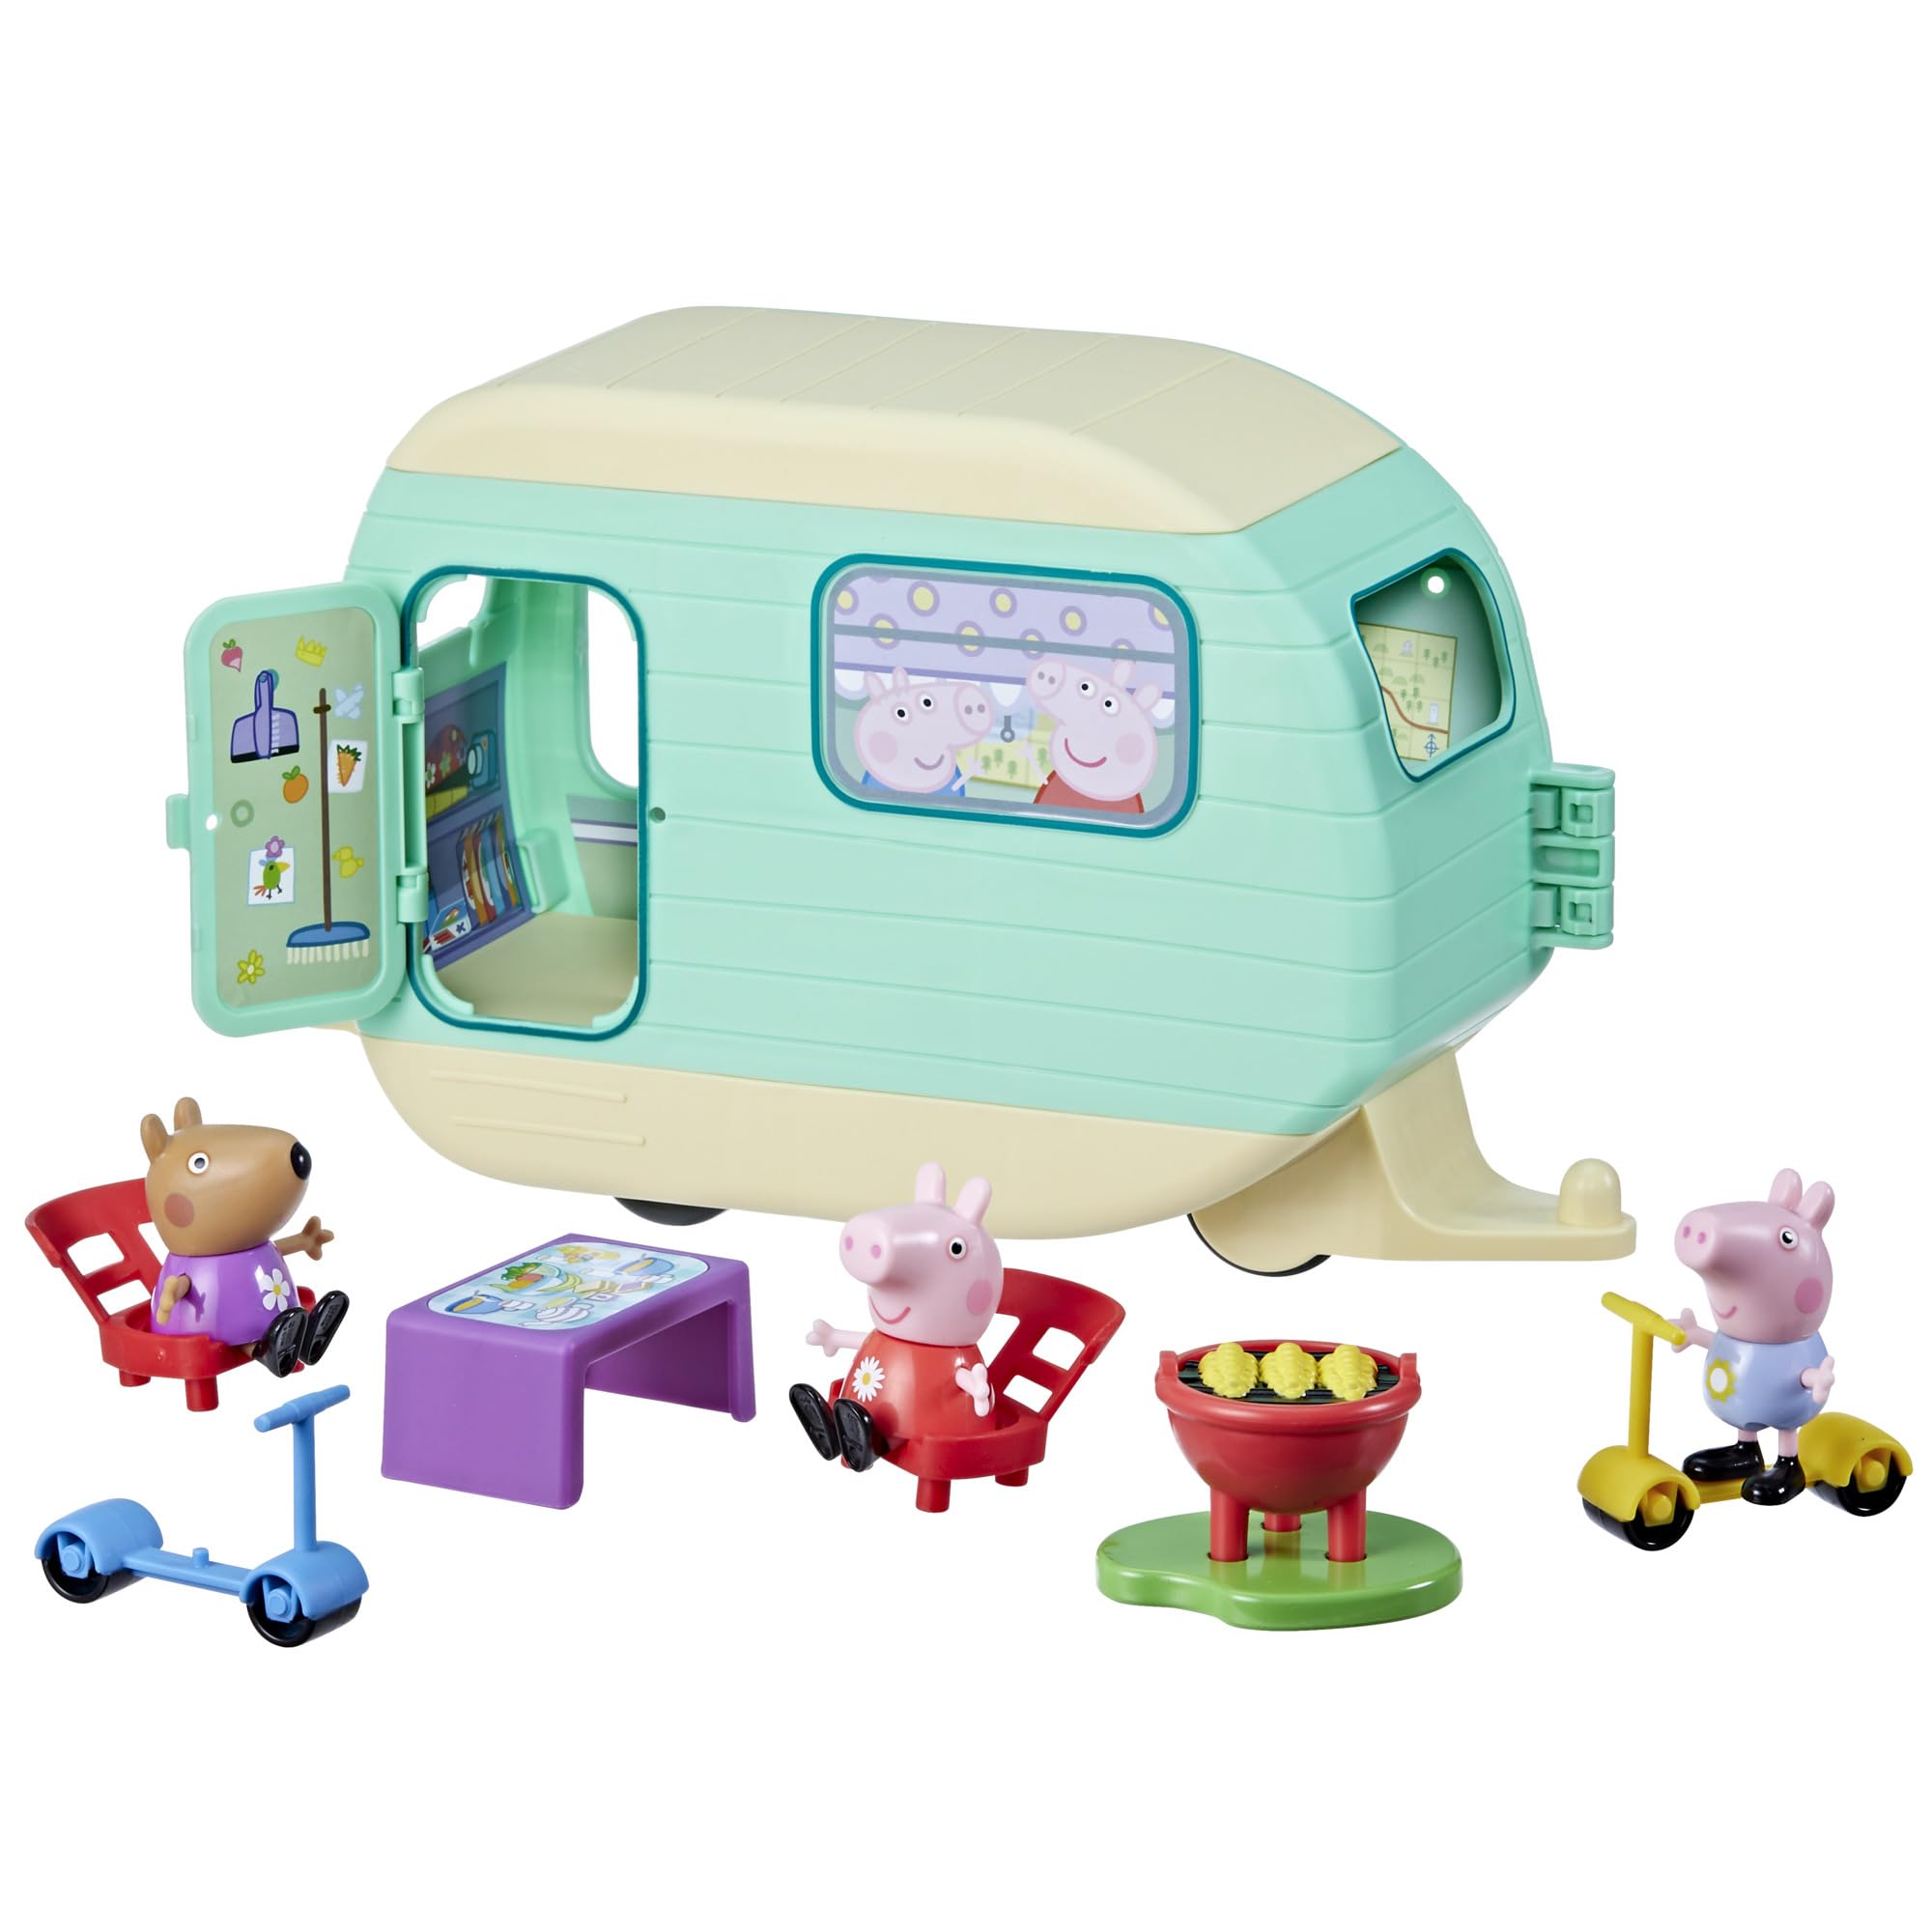 PEPPA PIG Caravan Playset with 3 Figures and 6 Accessories, Preschool Toys for 3 Year Old Girls and Boys and Up